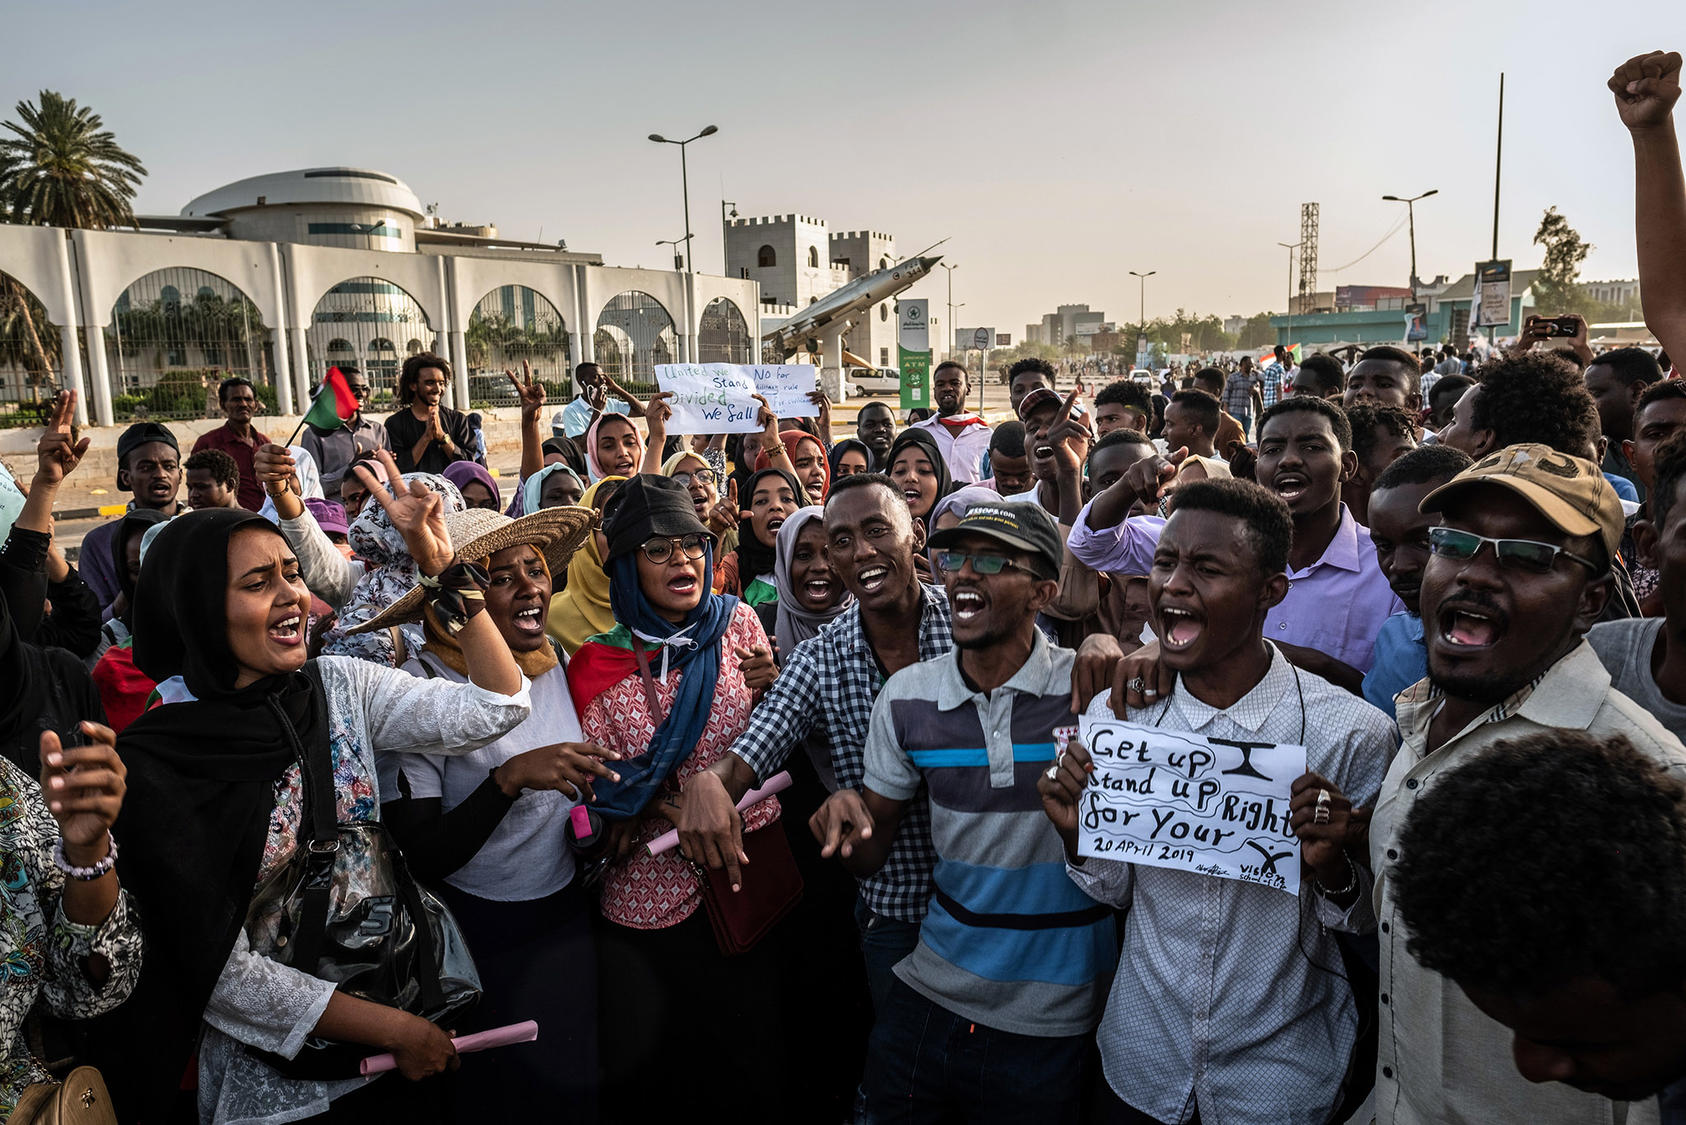 In 2019, Sudanese protesters brought an end to Omar al-Bashir’s 30-year rule. Such momentous leadership changes provide a window of opportunity for additional U.S. attention and support under the Global Fragility Act. (Bryan Denton/The New York Times)